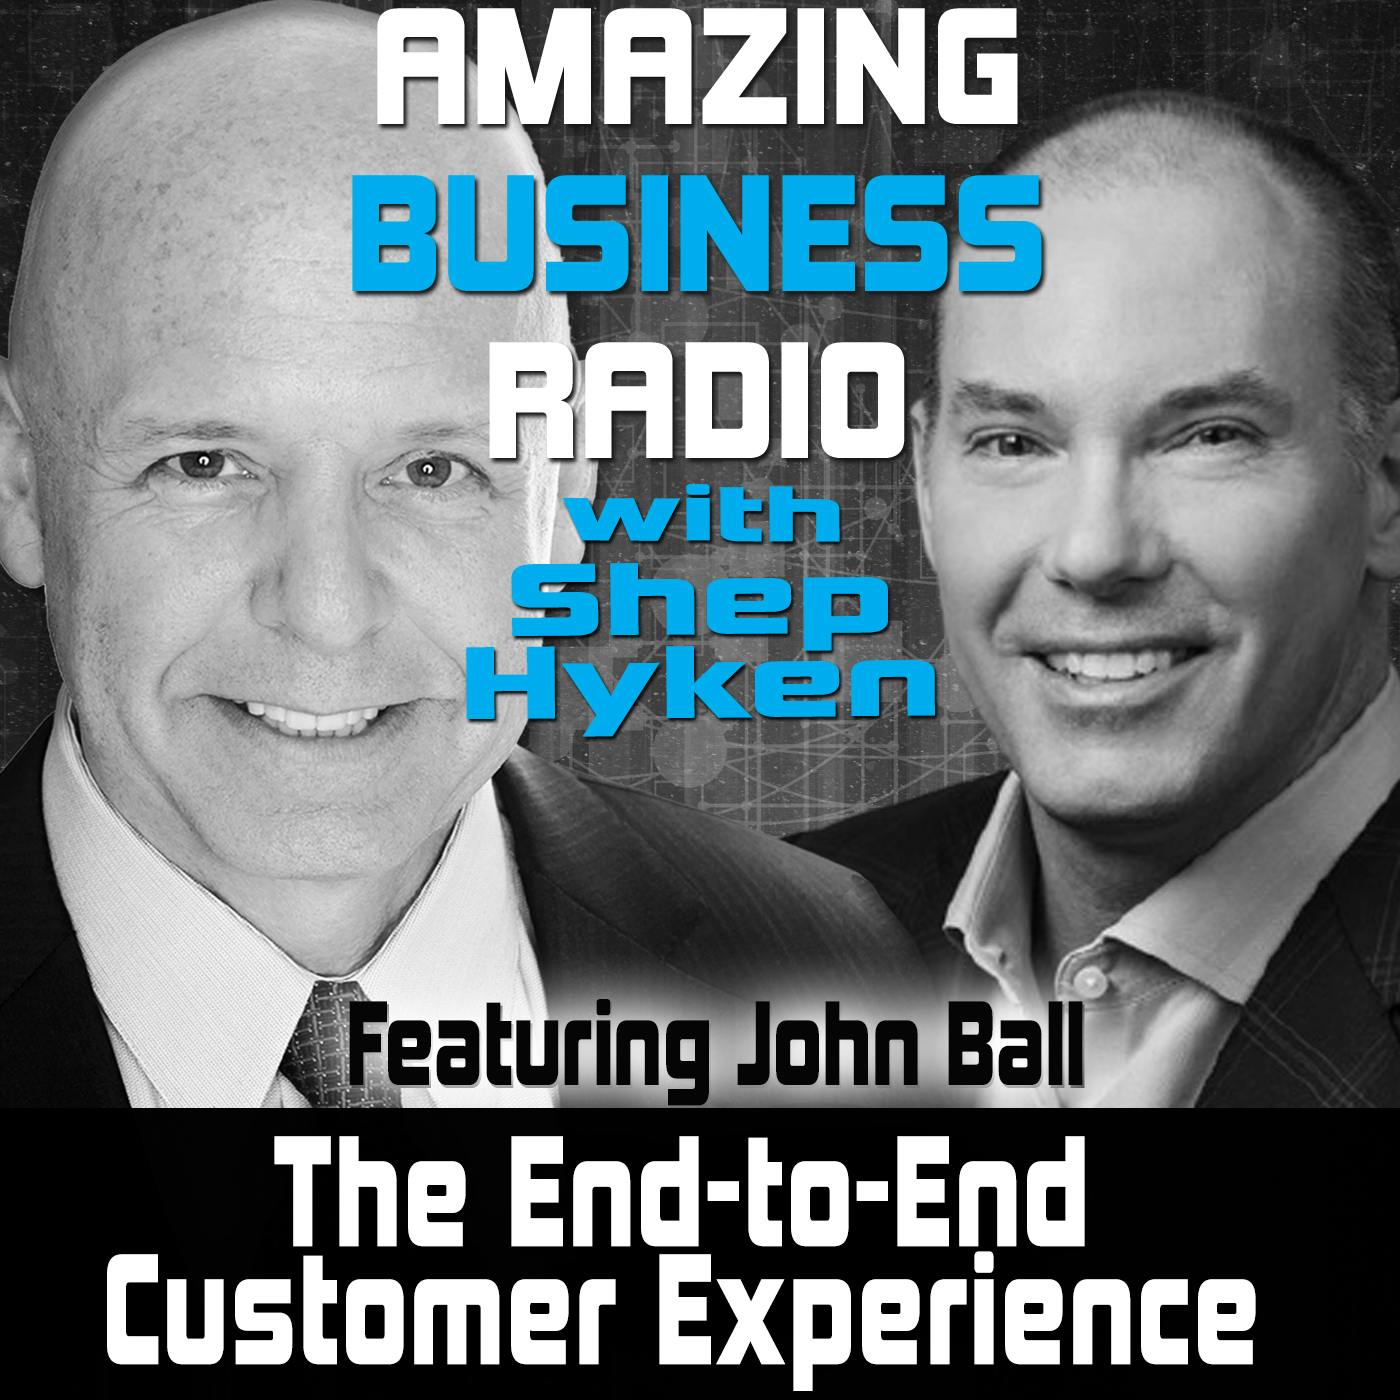 The End-to-End Customer Experience Featuring John Ball